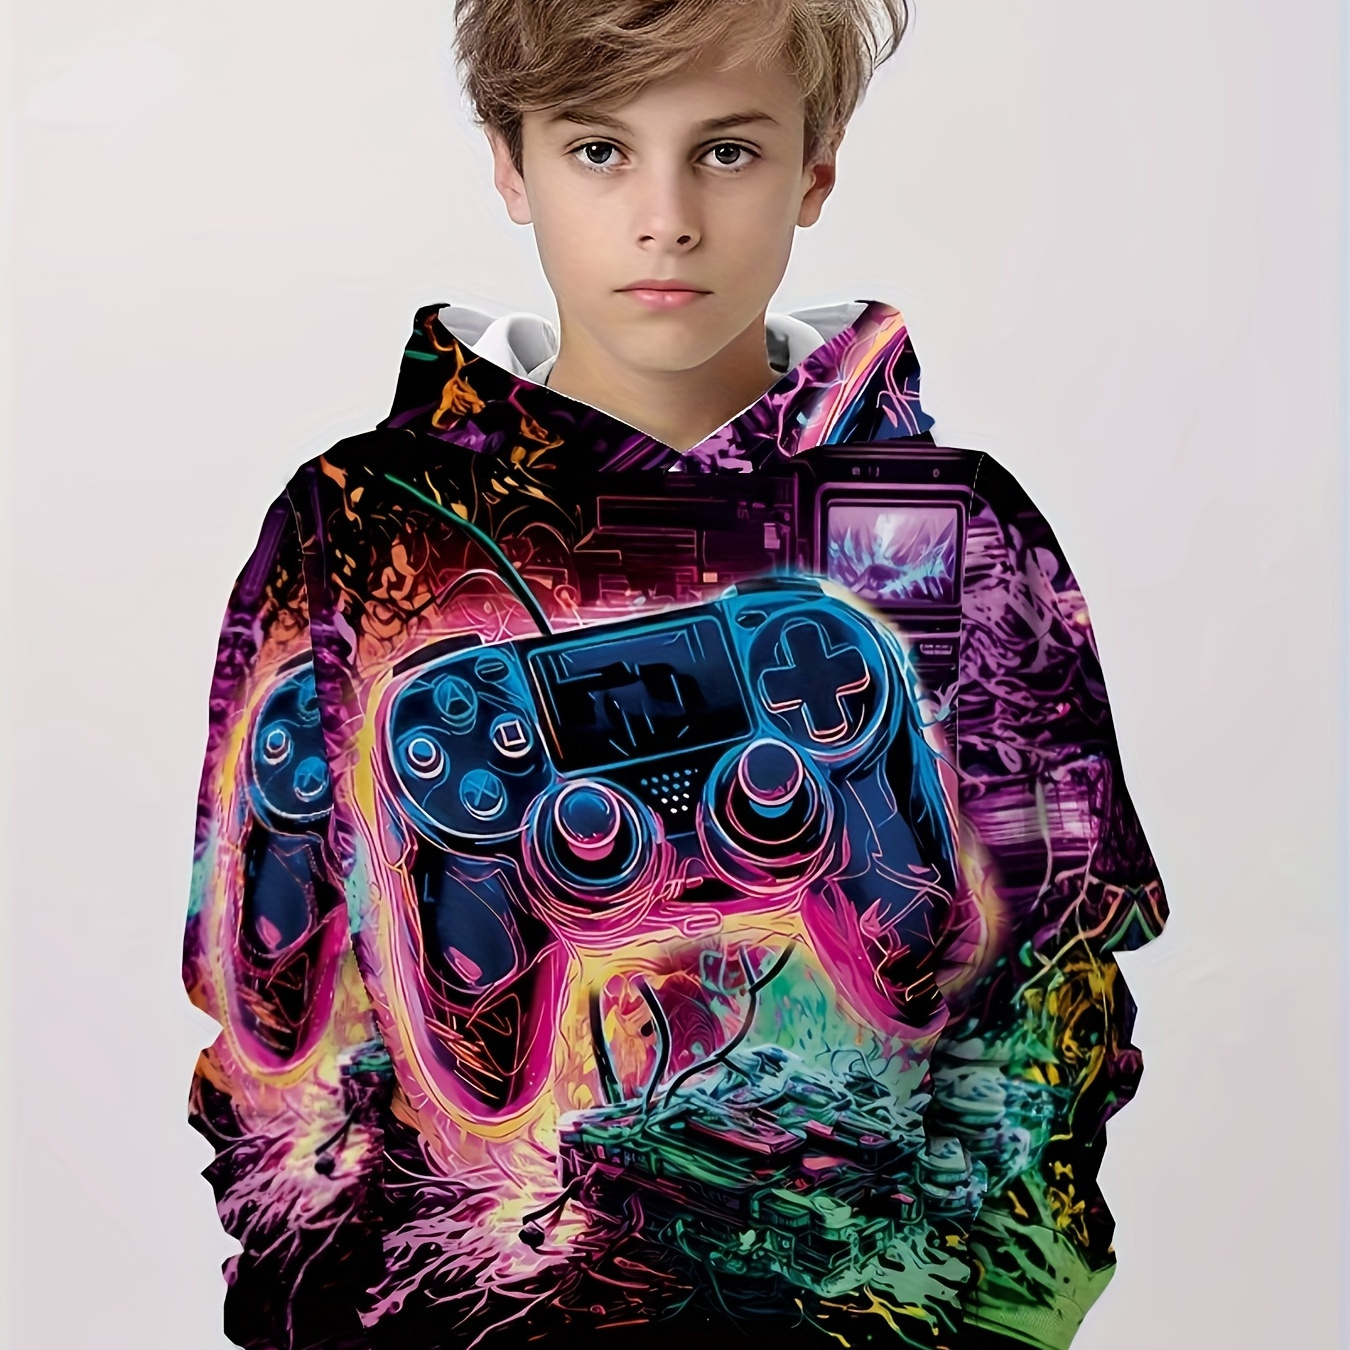 

Fashionable Colorful Gamepad 3d Print Boys Hoodie, Stay Stylish And Cozy Sweatshirt - Perfect Spring Fall Winter Essential For Your Little Fashionista!